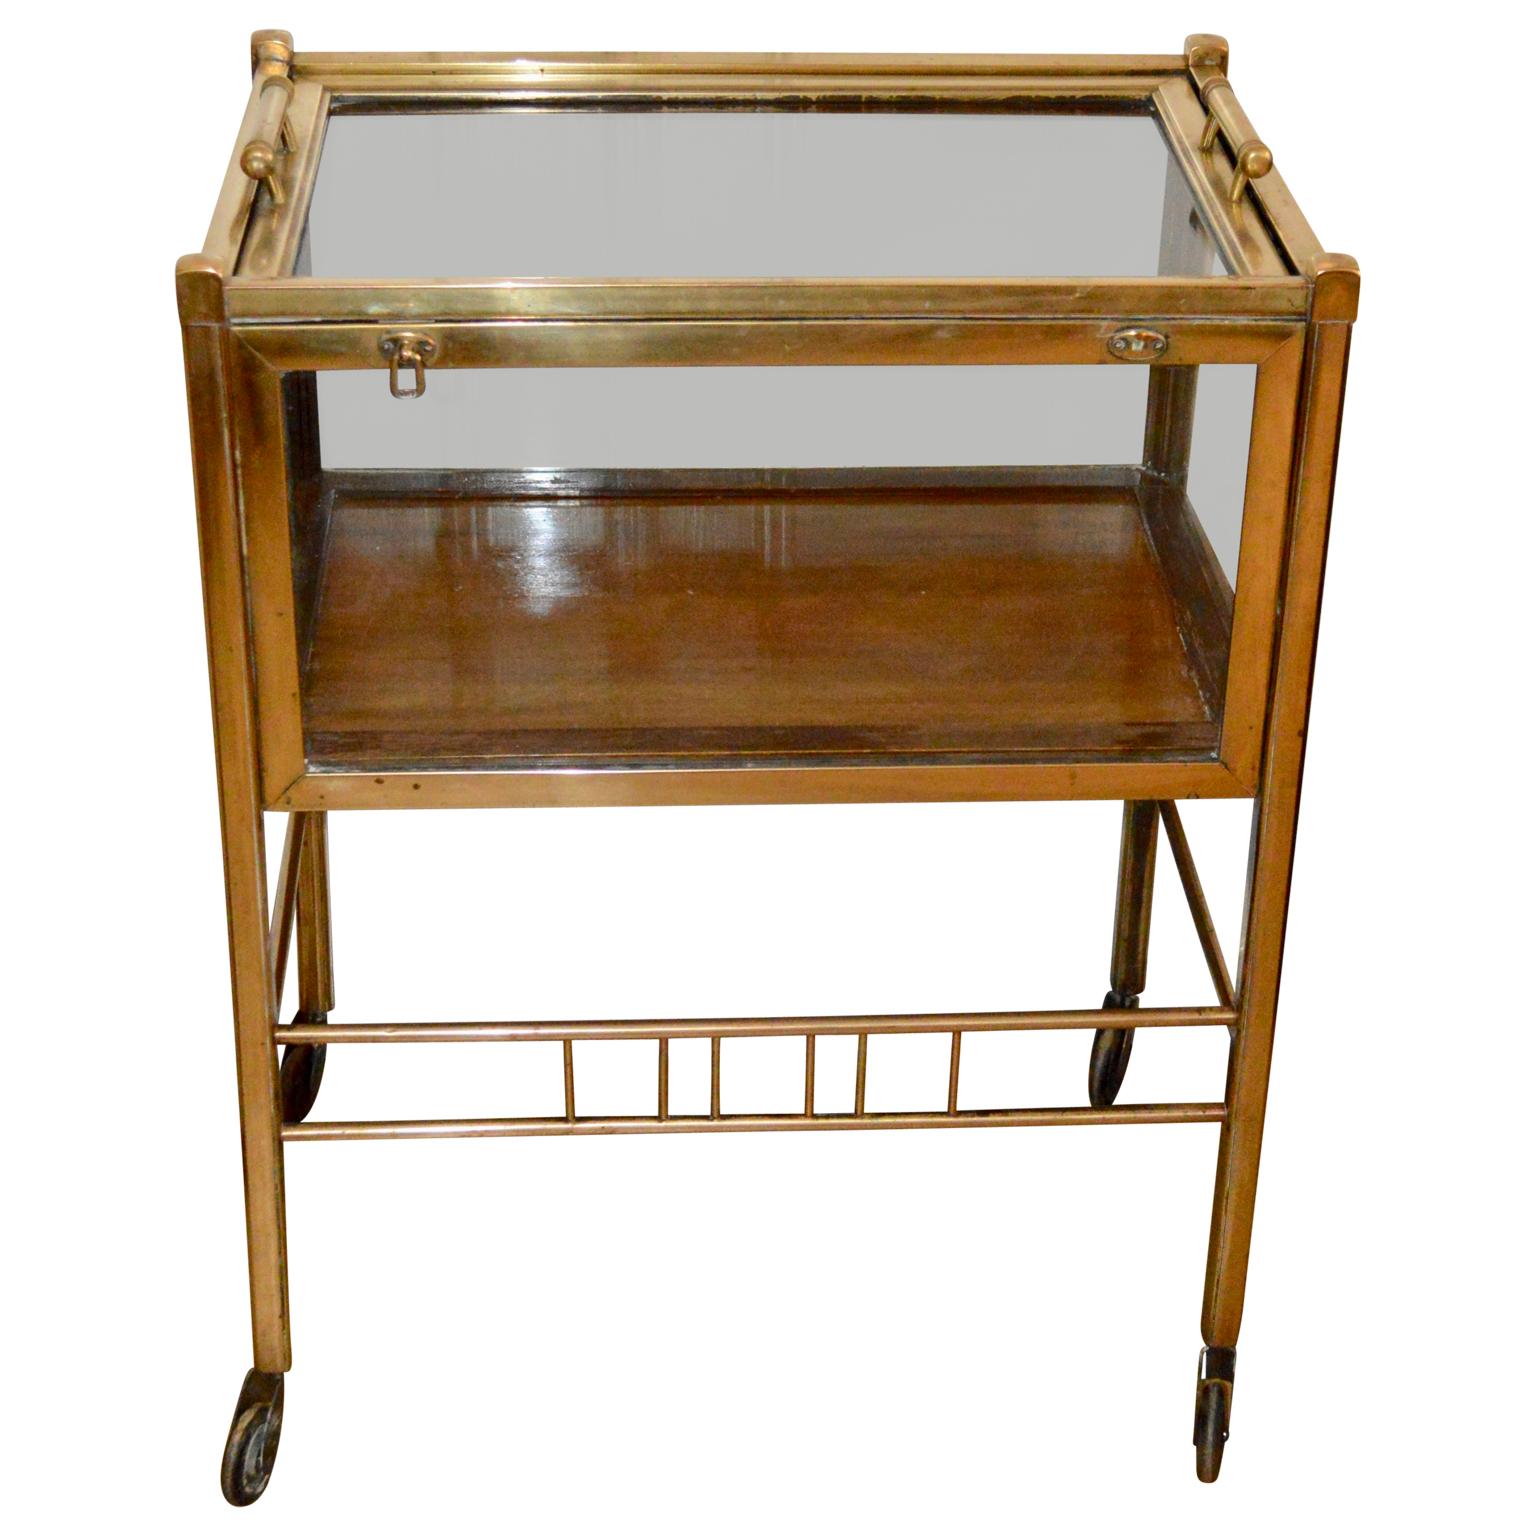 Art Deco brass and wood bar cart trolley by Ernst Rockhausen, Germany, 1920s.

   